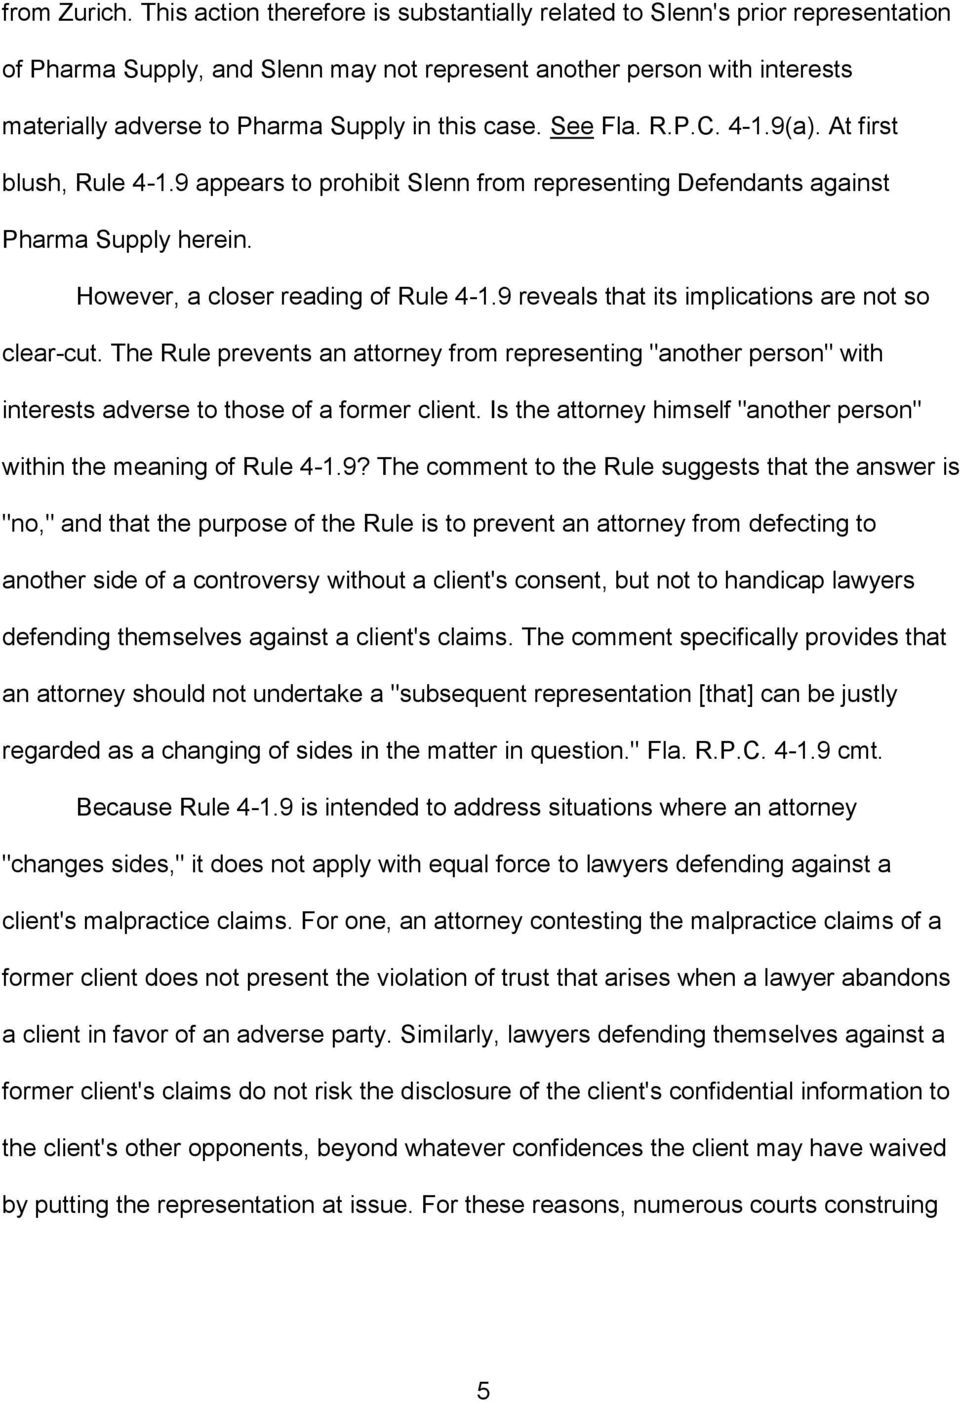 case. See Fla. R.P.C. 4-1.9(a). At first blush, Rule 4-1.9 appears to prohibit Slenn from representing Defendants against Pharma Supply herein. However, a closer reading of Rule 4-1.